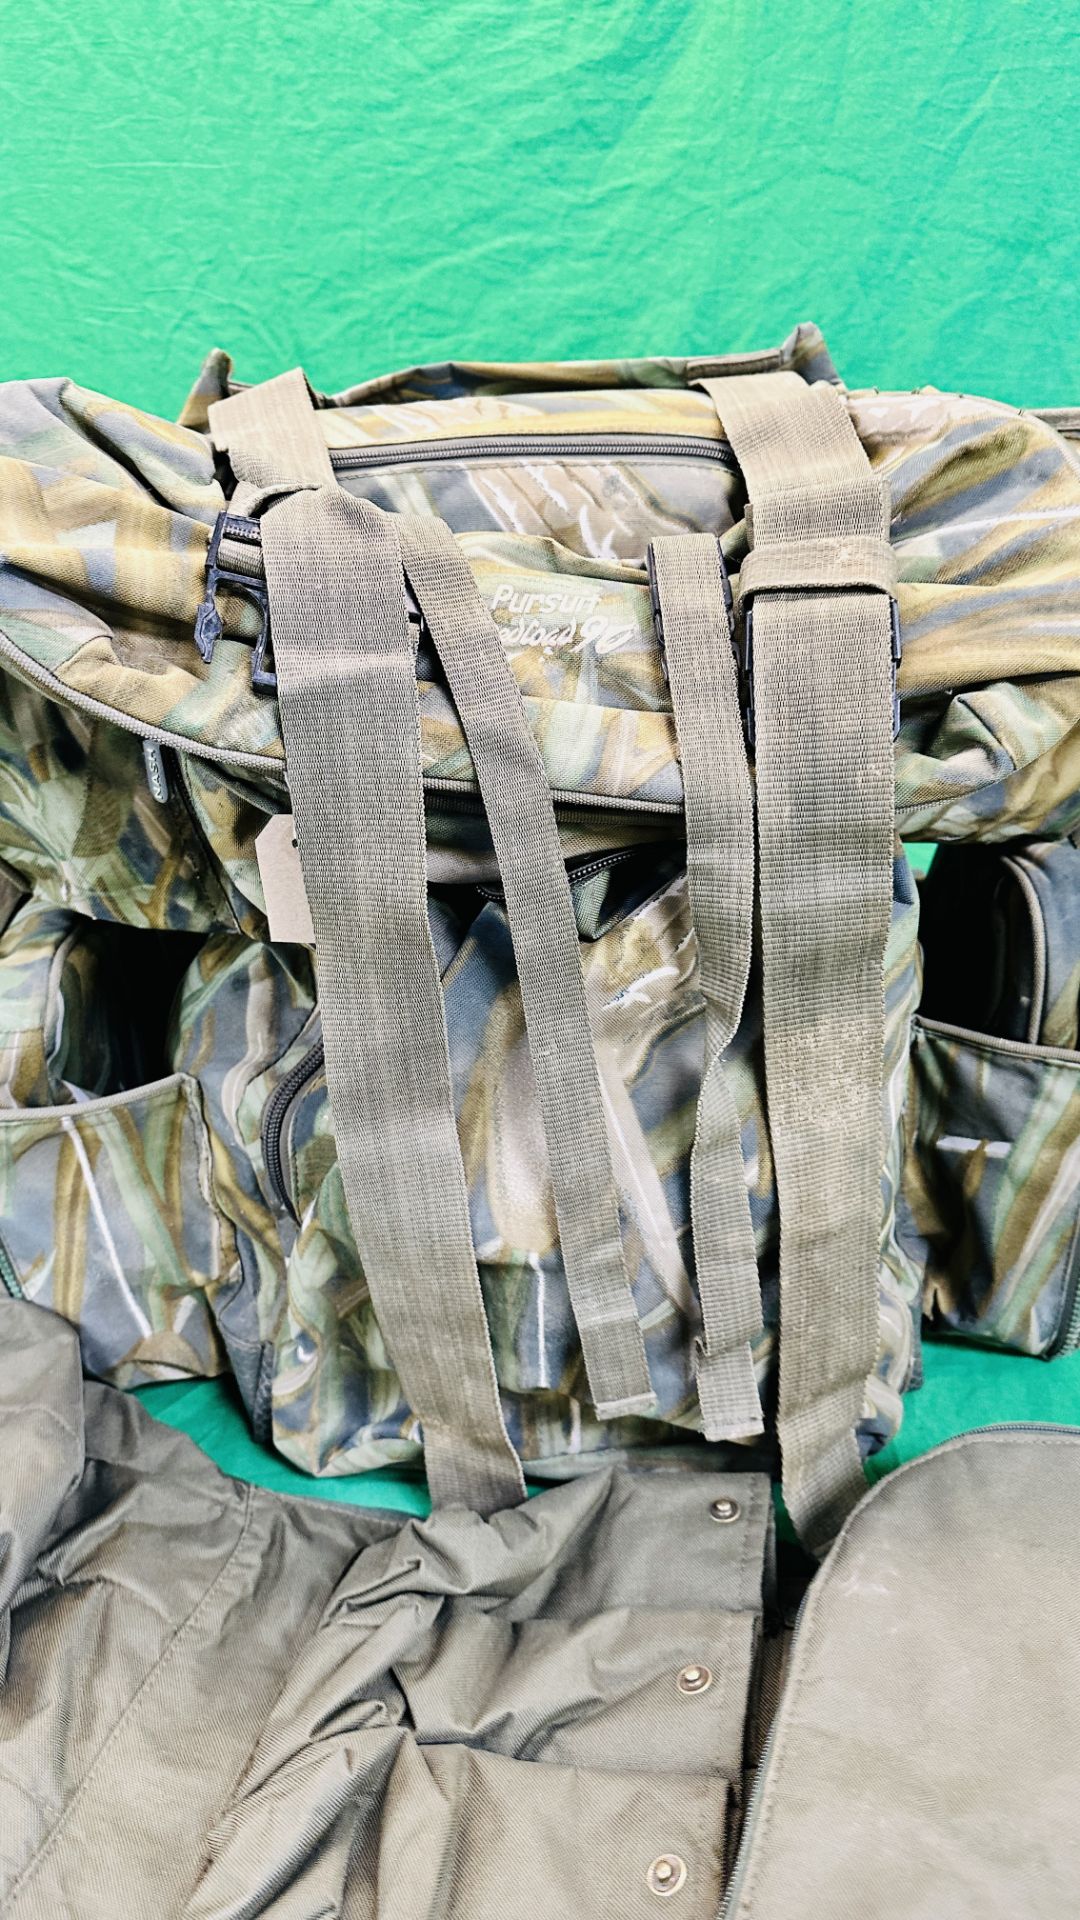 NASH CAMOUFLAGE MULTI POCKET BACK PACK ALONG WITH T F GEAR CAMOUFLAGE JACKET SIZE L AND ROD BAG. - Image 6 of 11